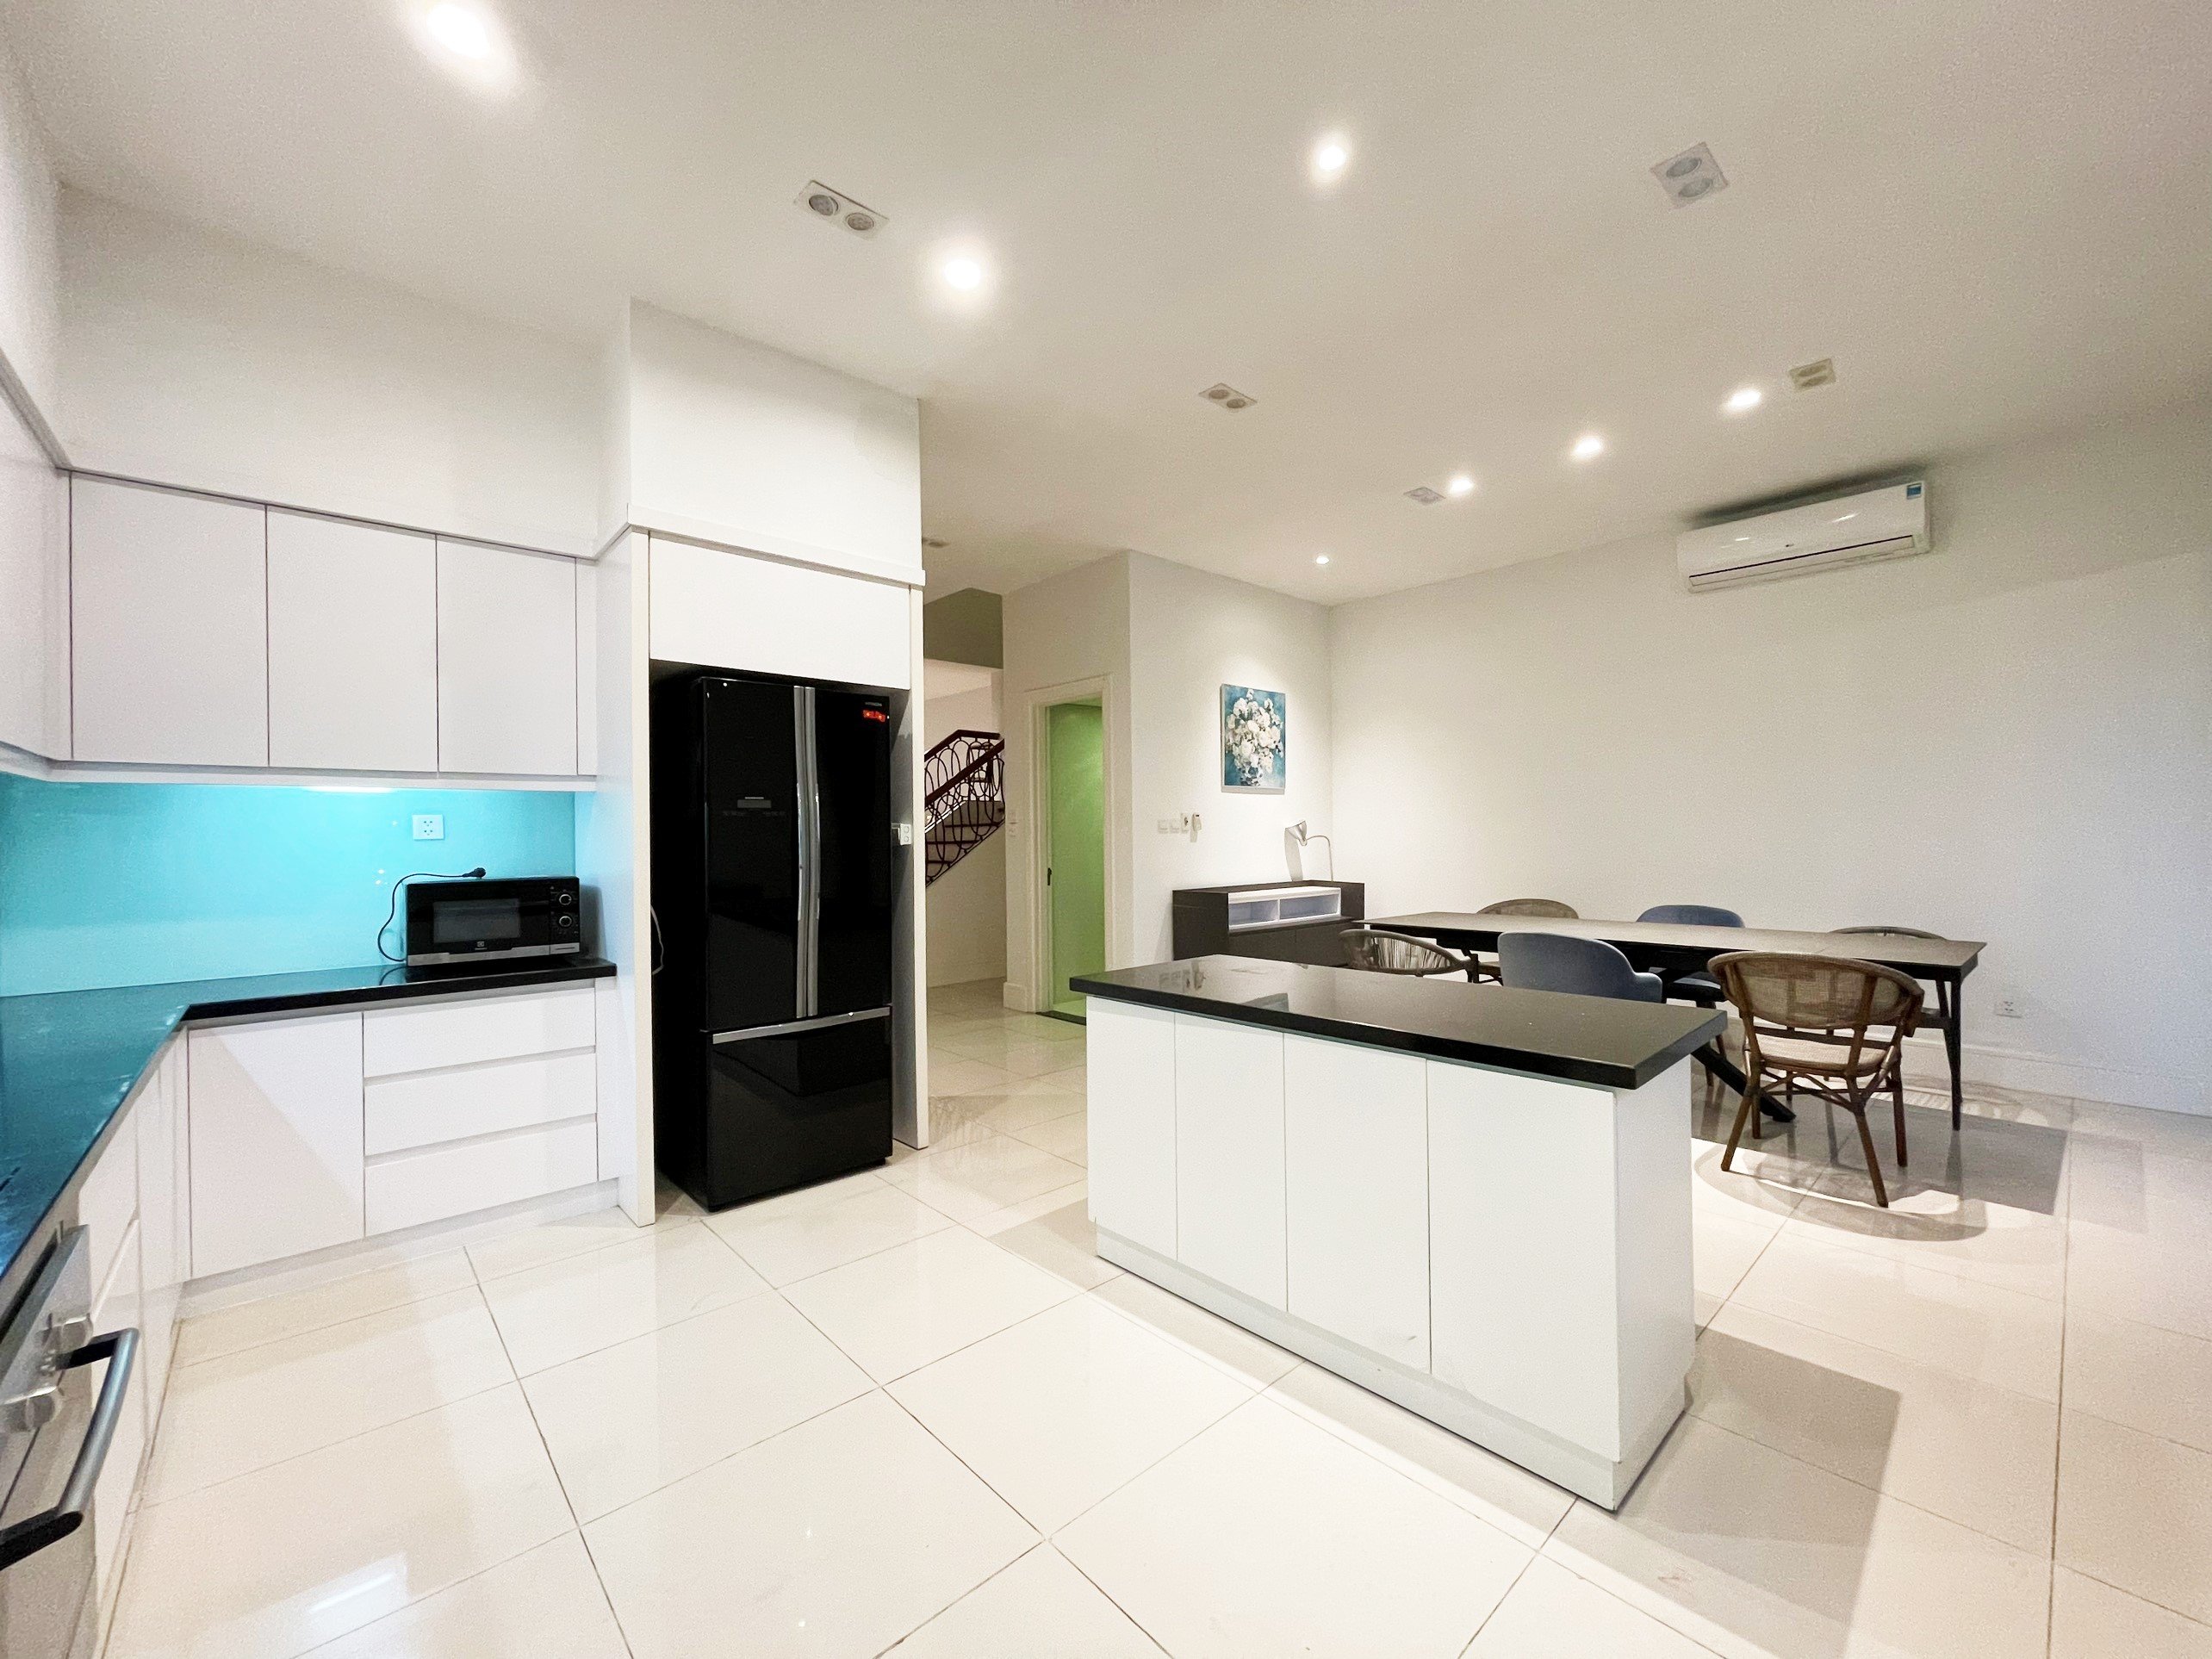 Reasonable Villa in Hoa Sua block, Vinhomes Riverside is Available for Rent now 6